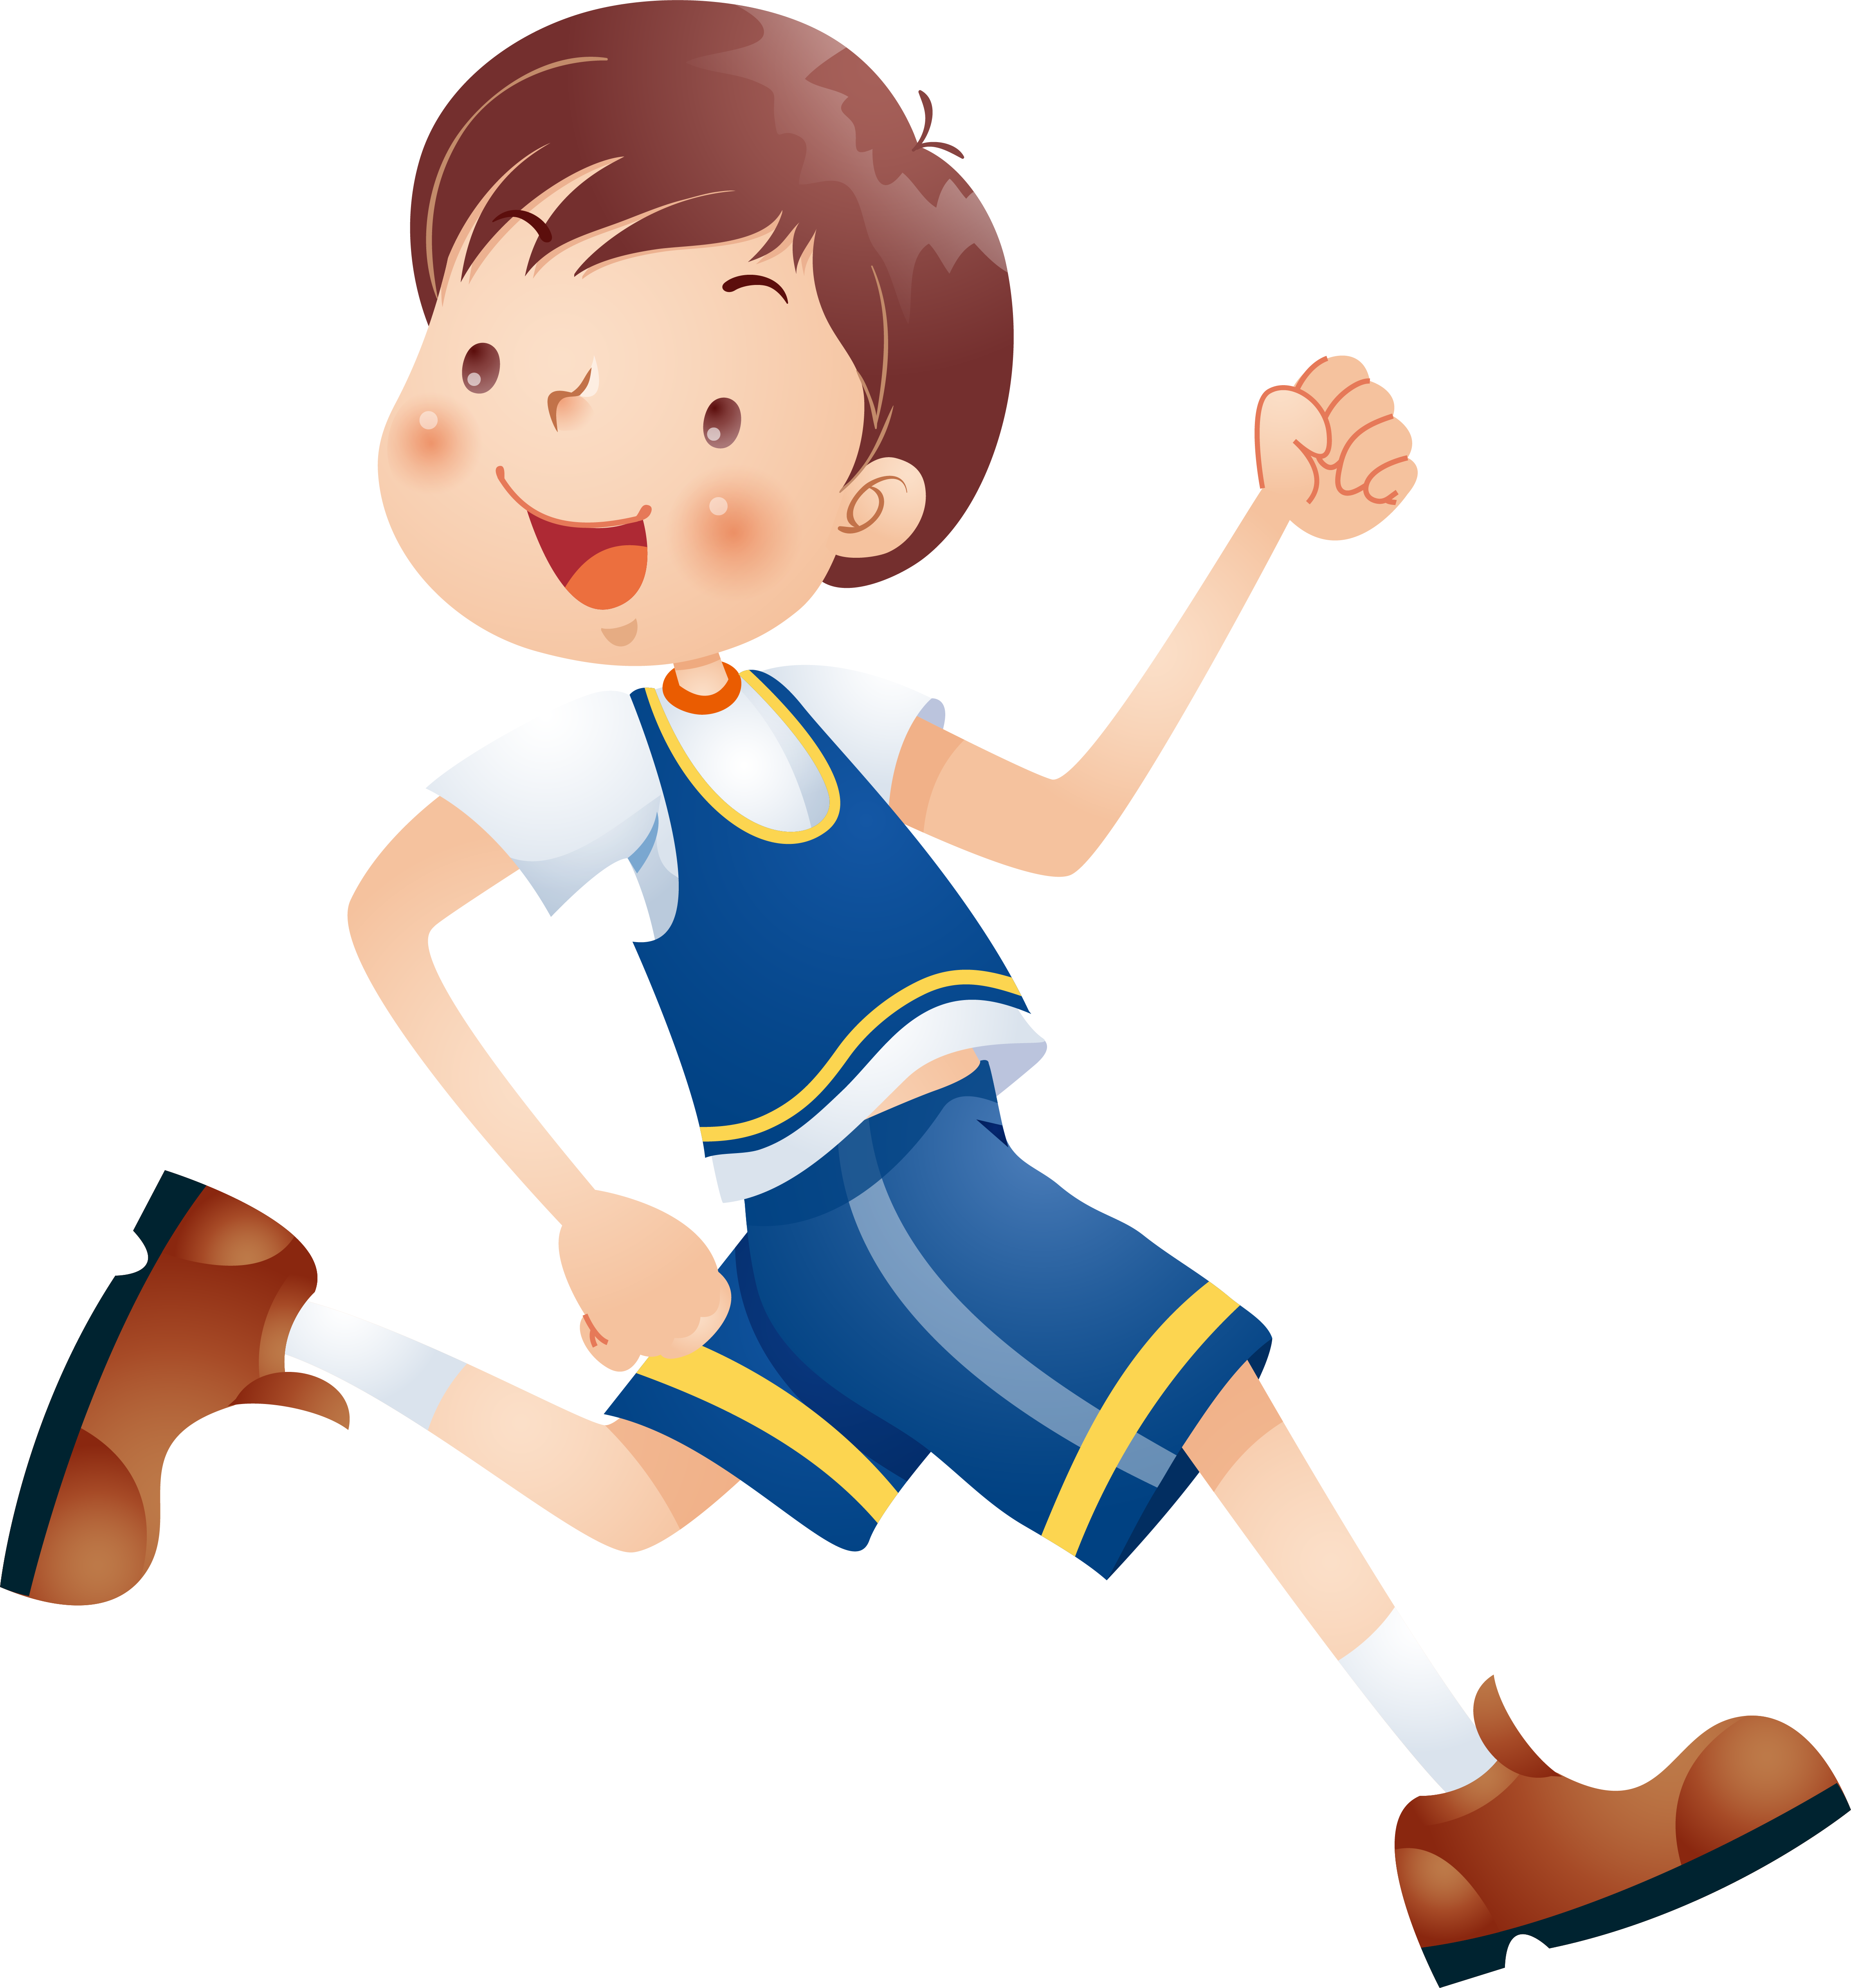 Clipart walking free download on WebStockReview